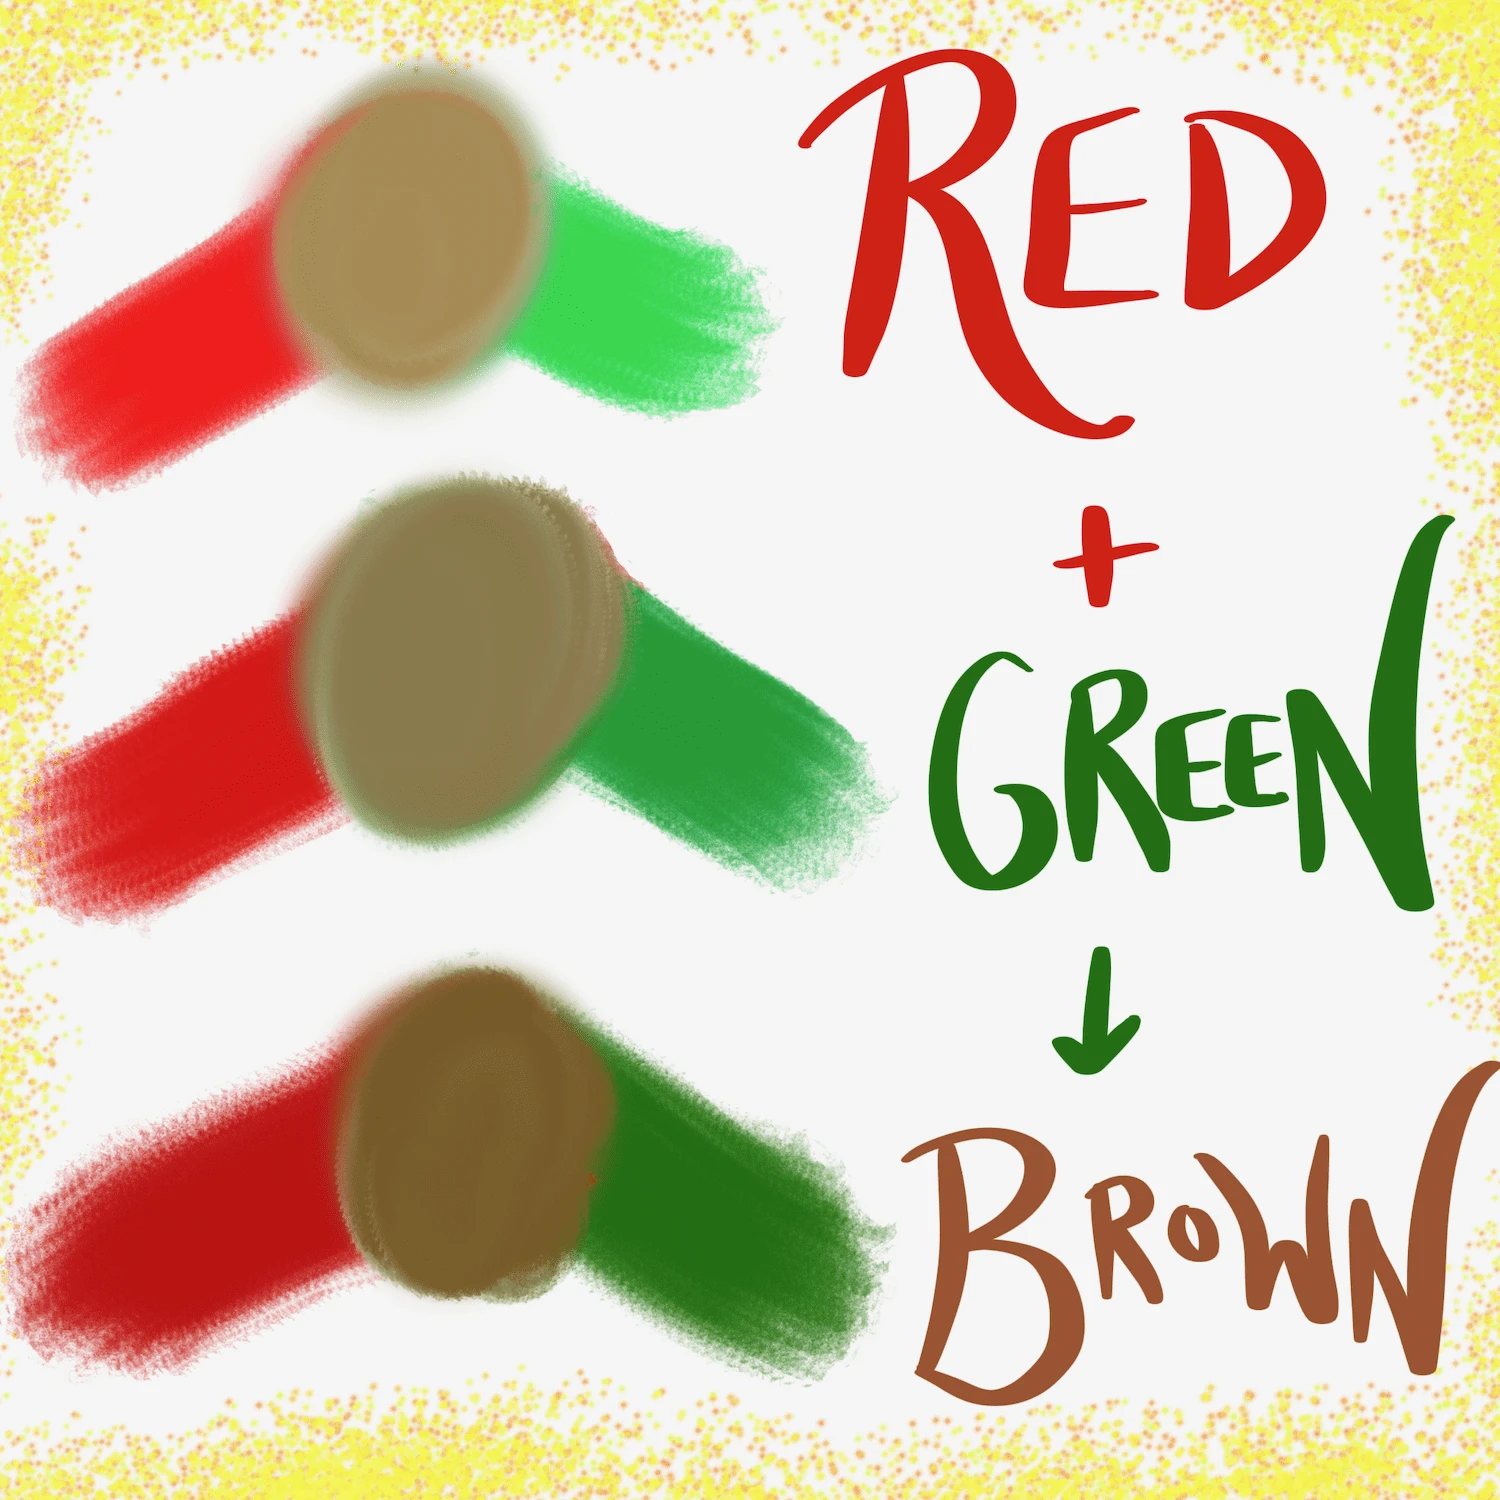 Green plus red equals brown.